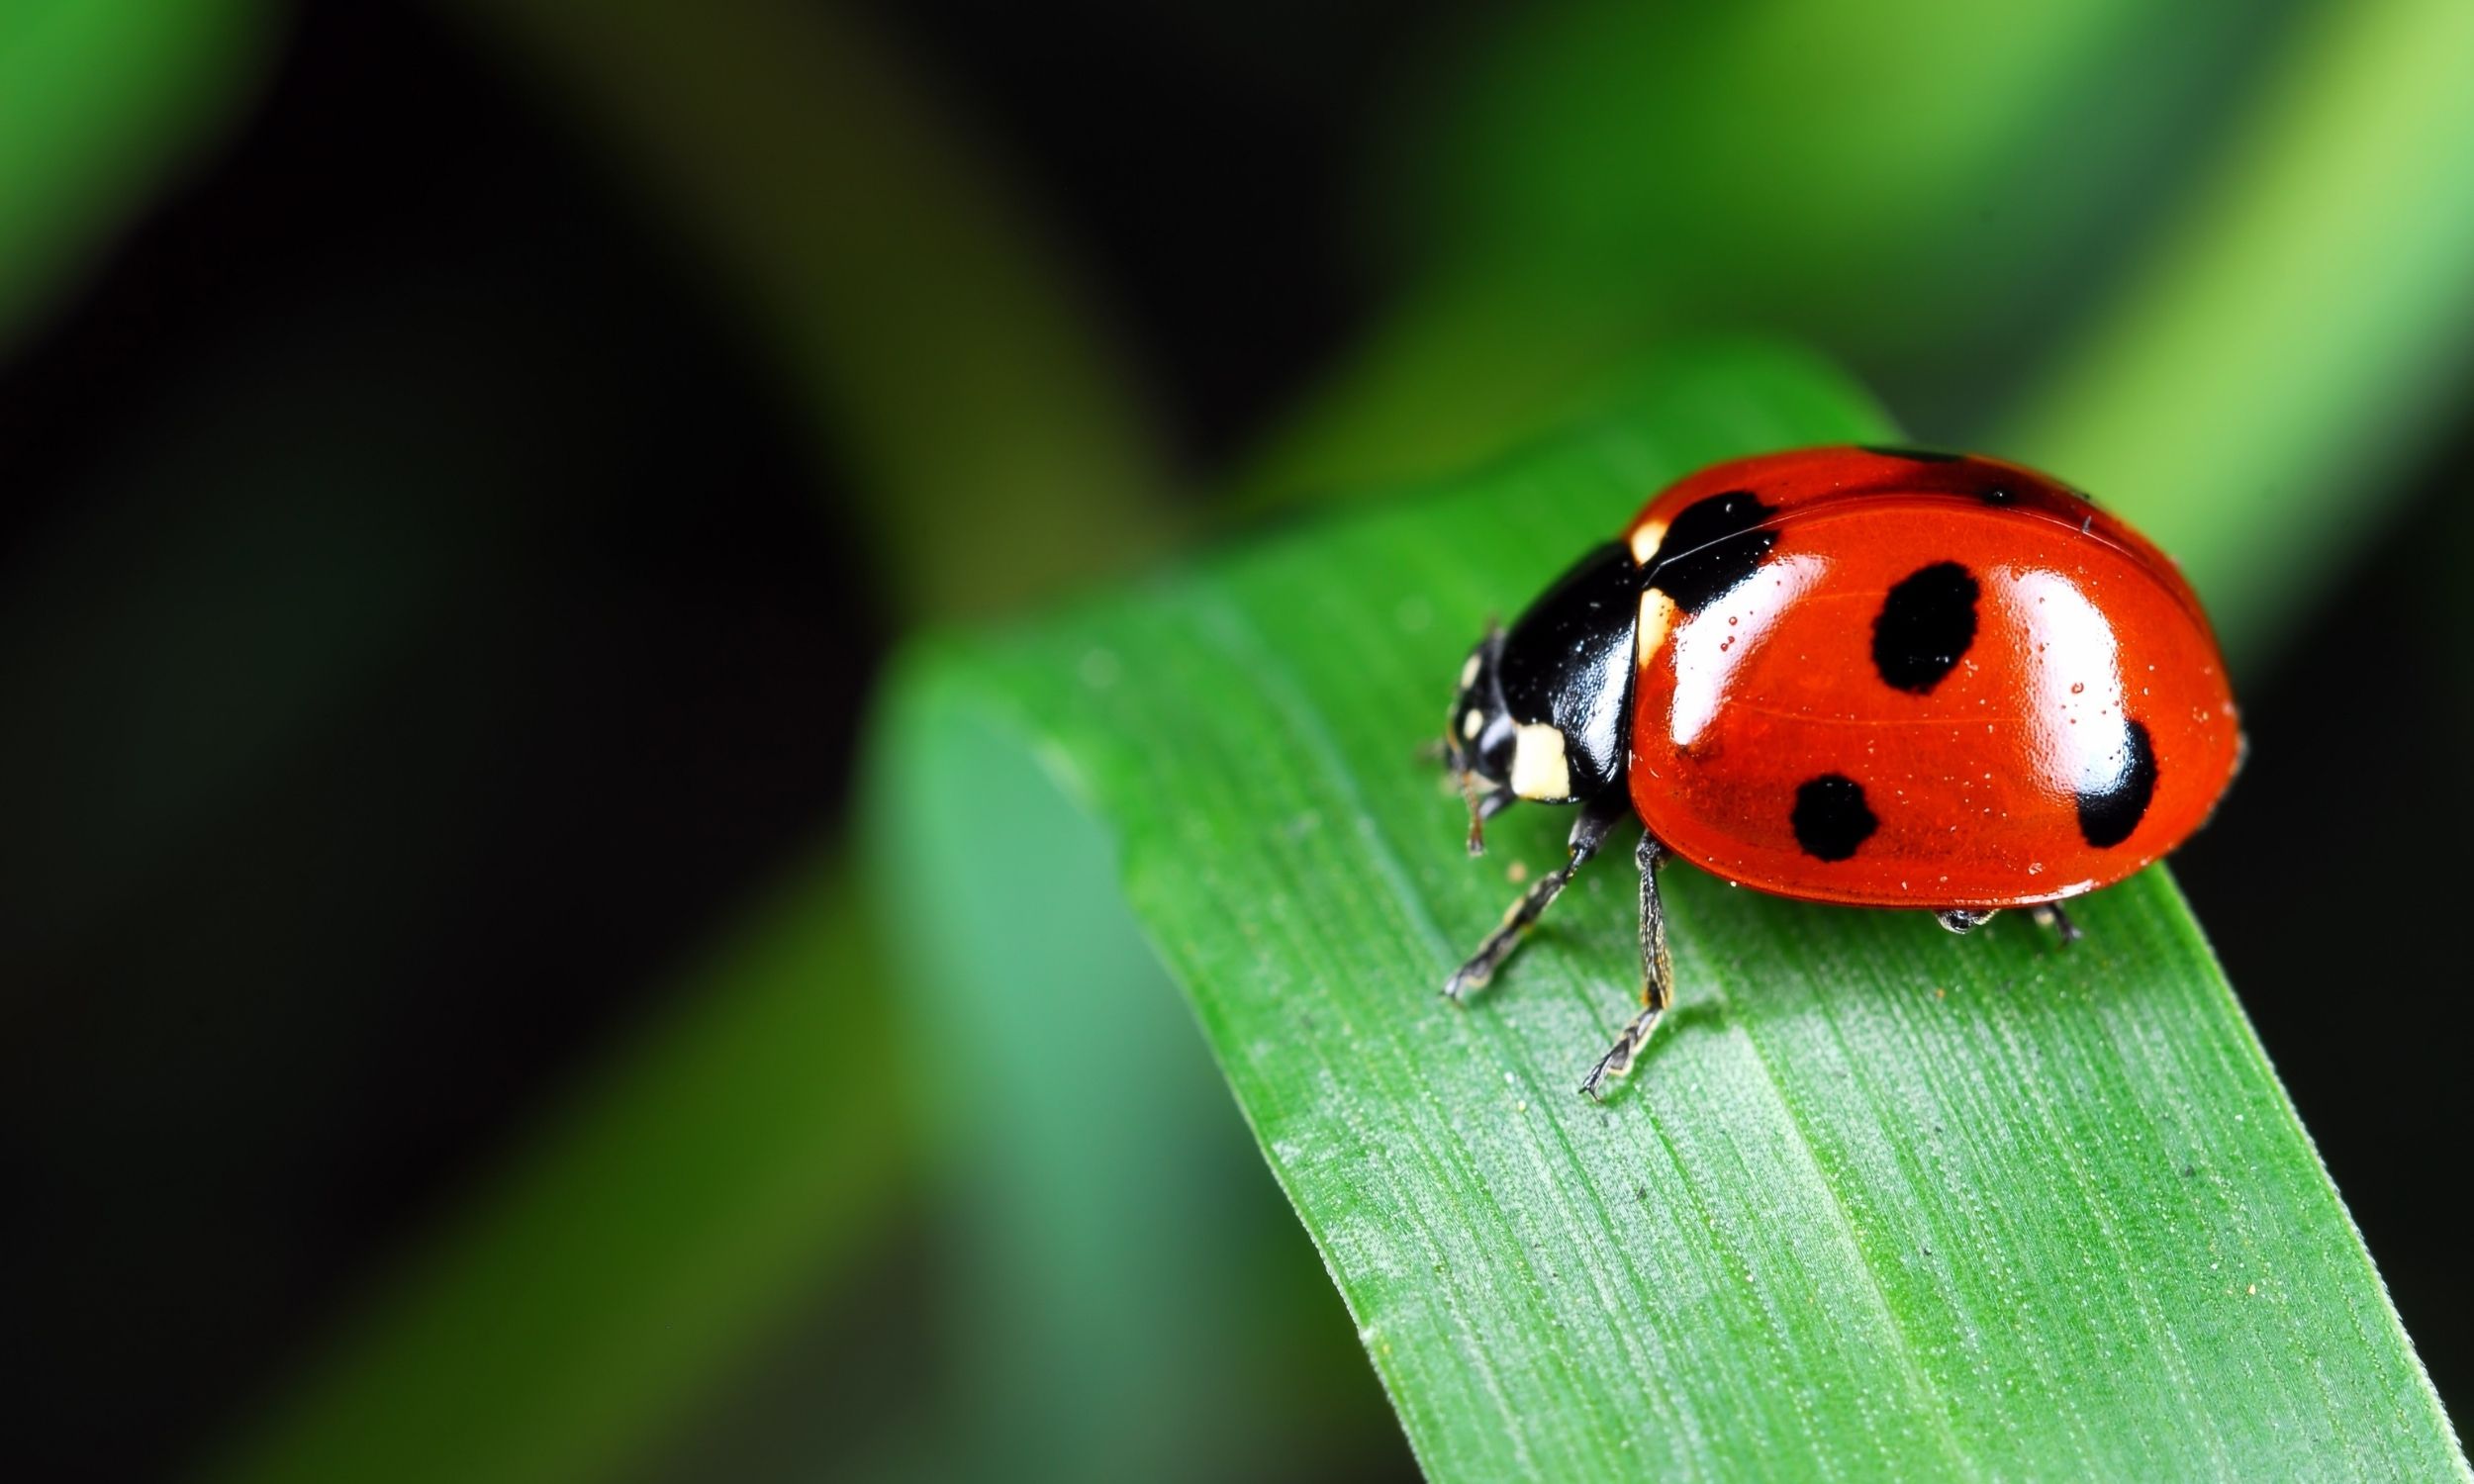 red ladybug on a piece of grass